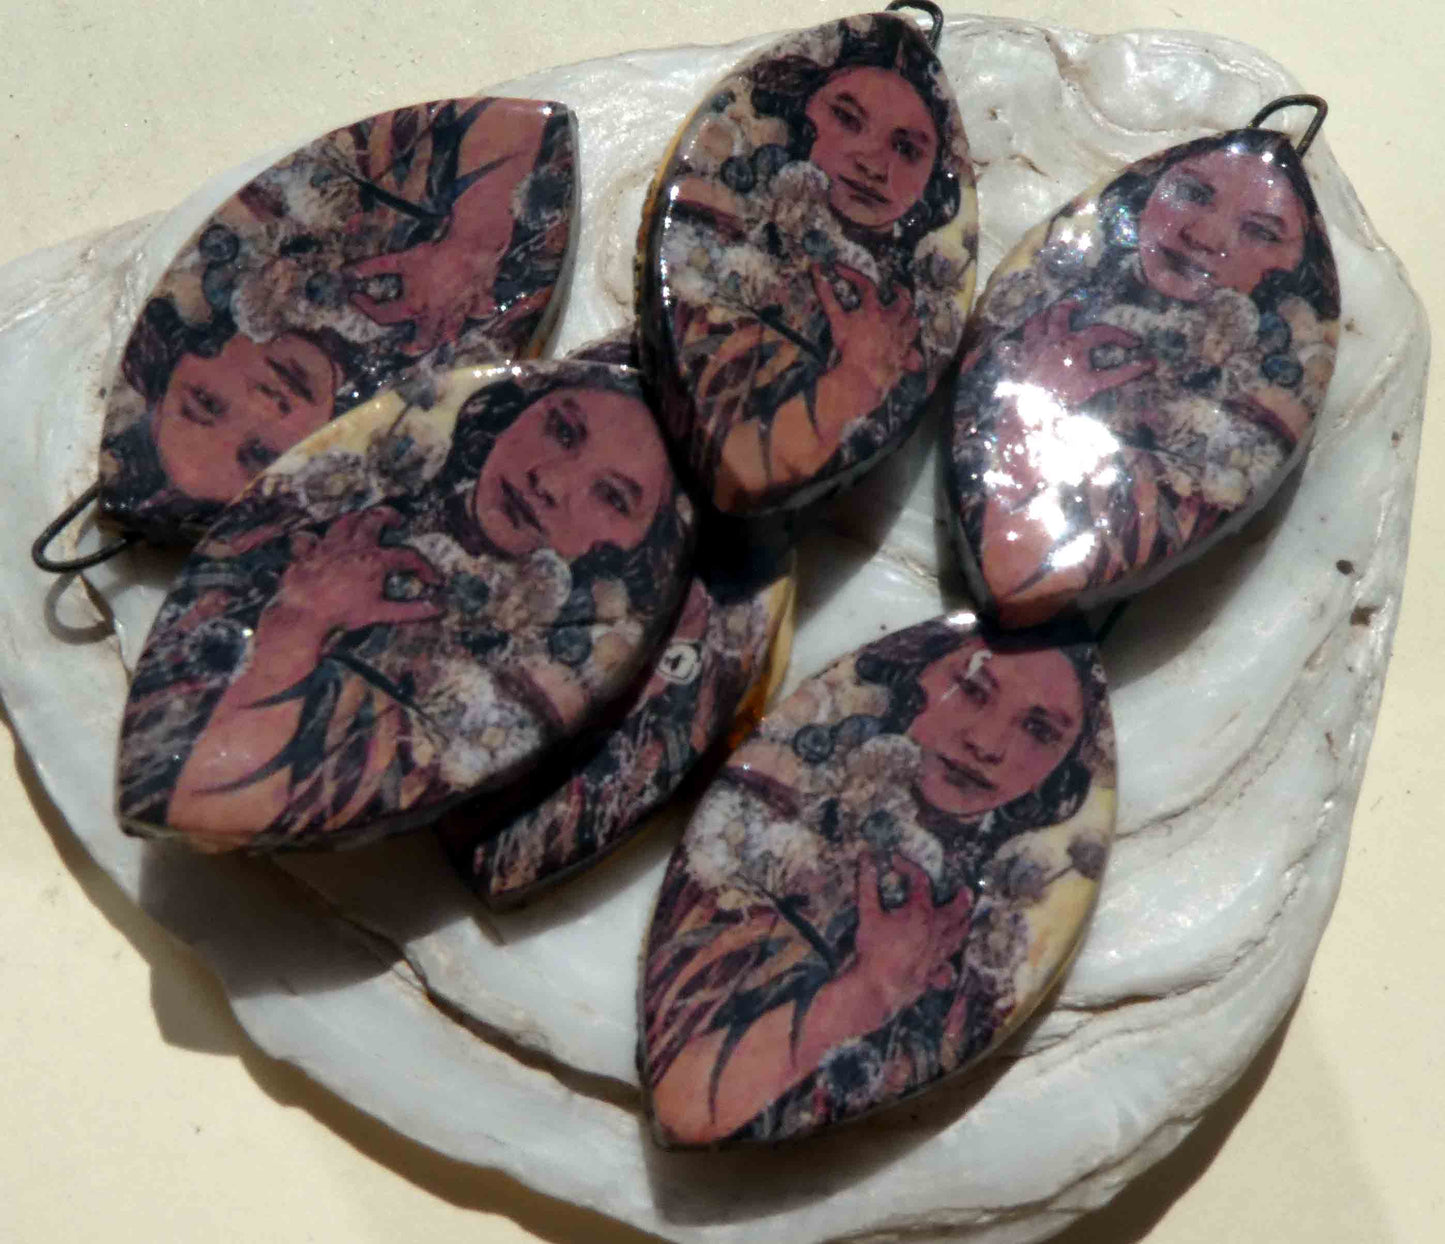 Ceramic Decal Mucha Earring Droppers #26